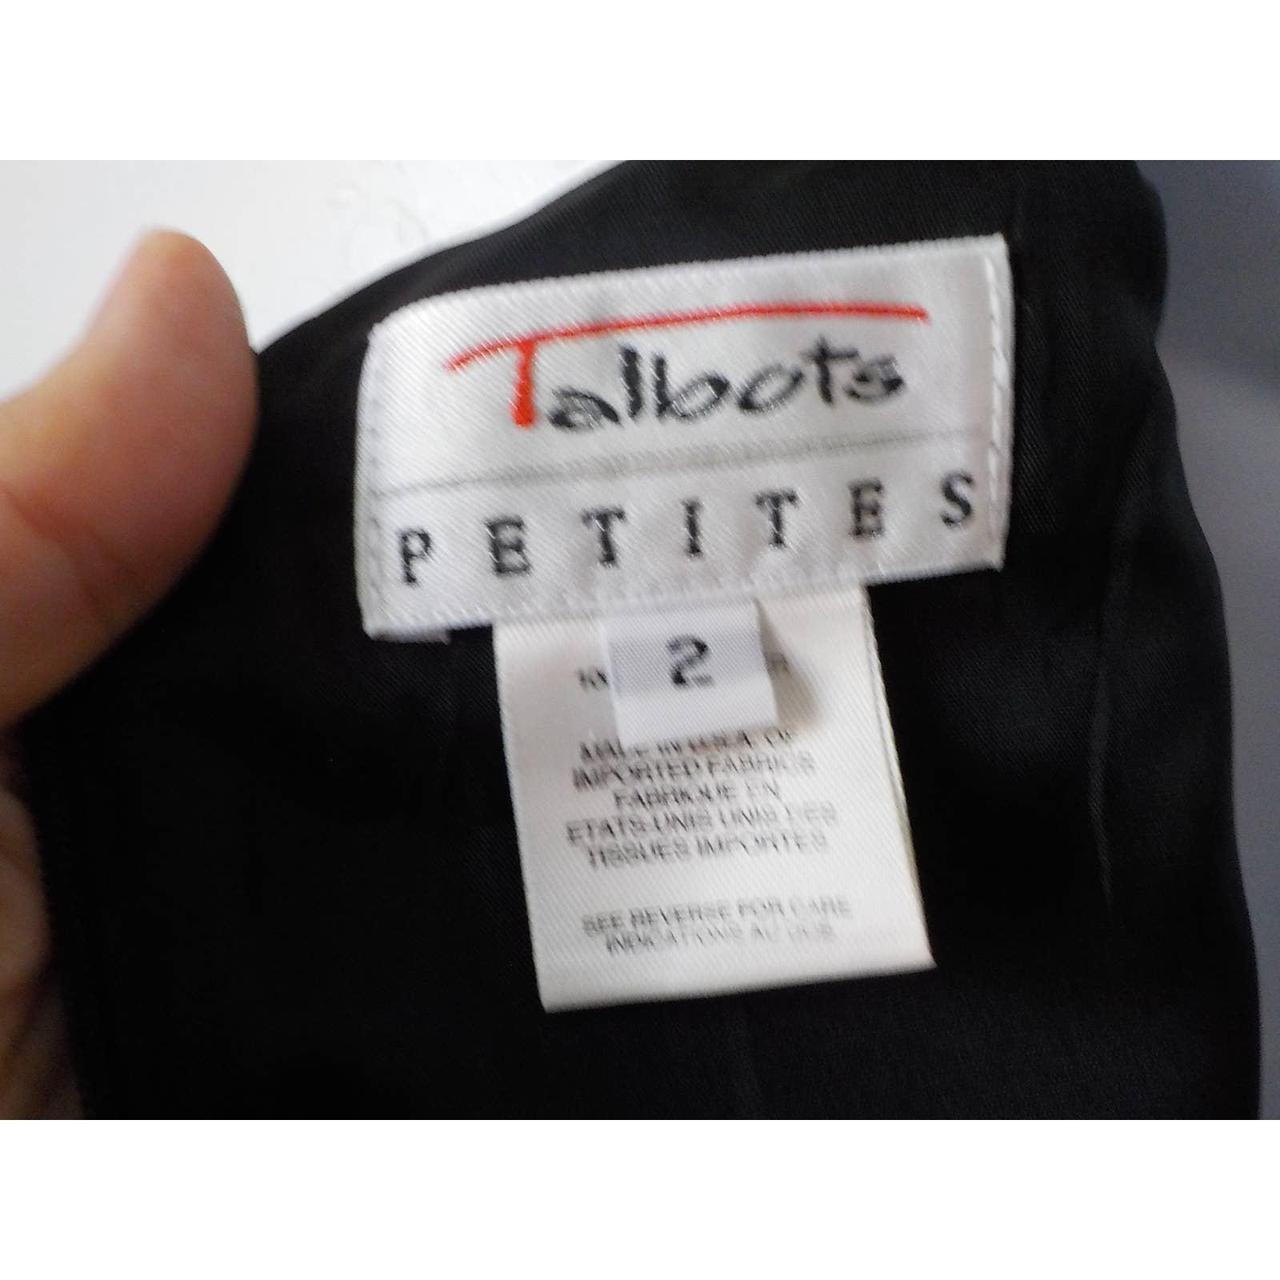 Talbots dress, size 8, in great vintage condition! - Depop